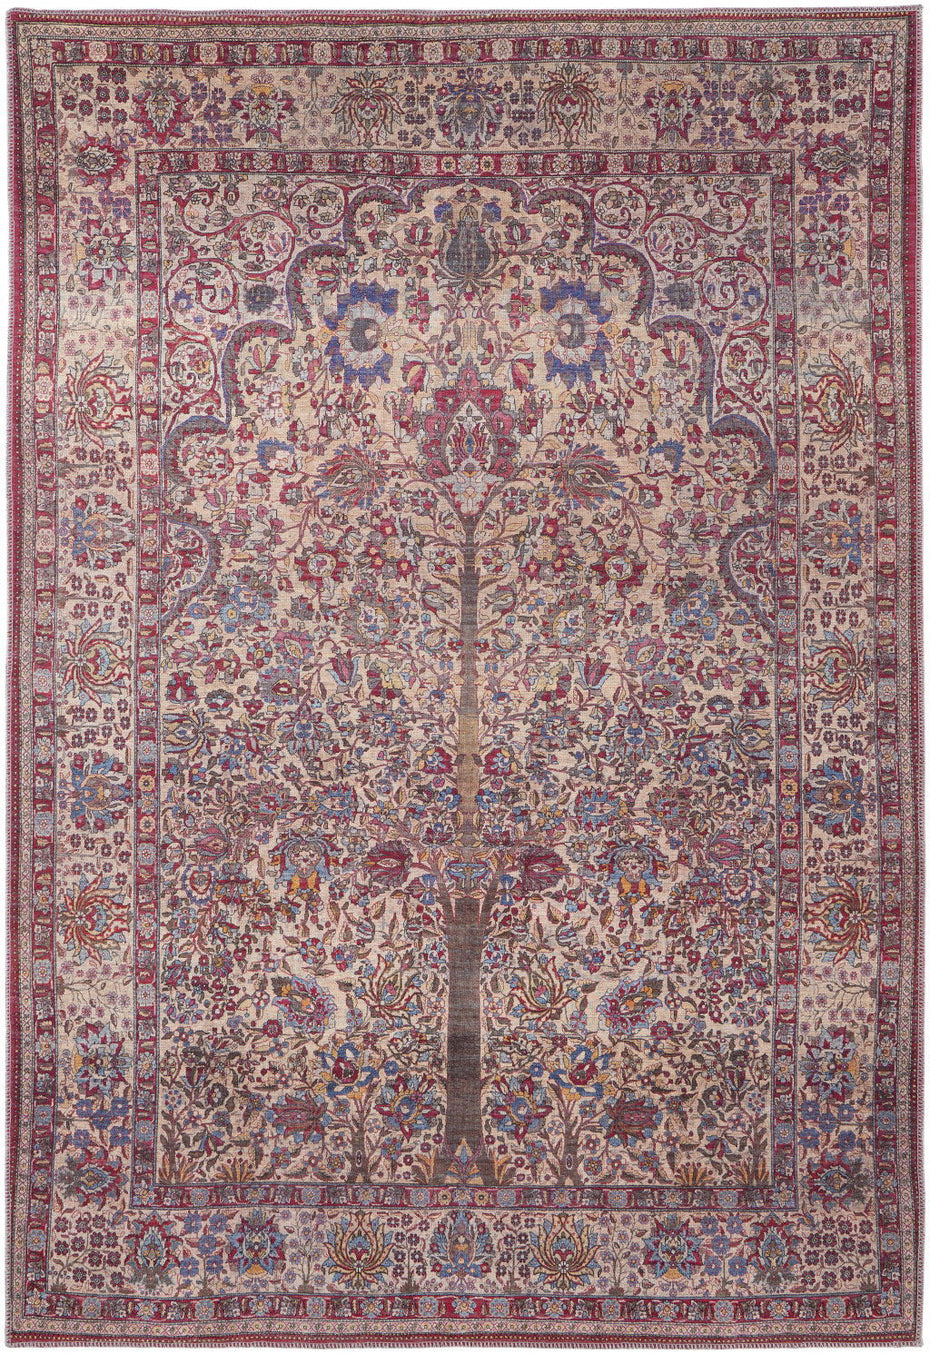 Floral Power Loom Area Rug - Pink Red Tan - 2' X 3'